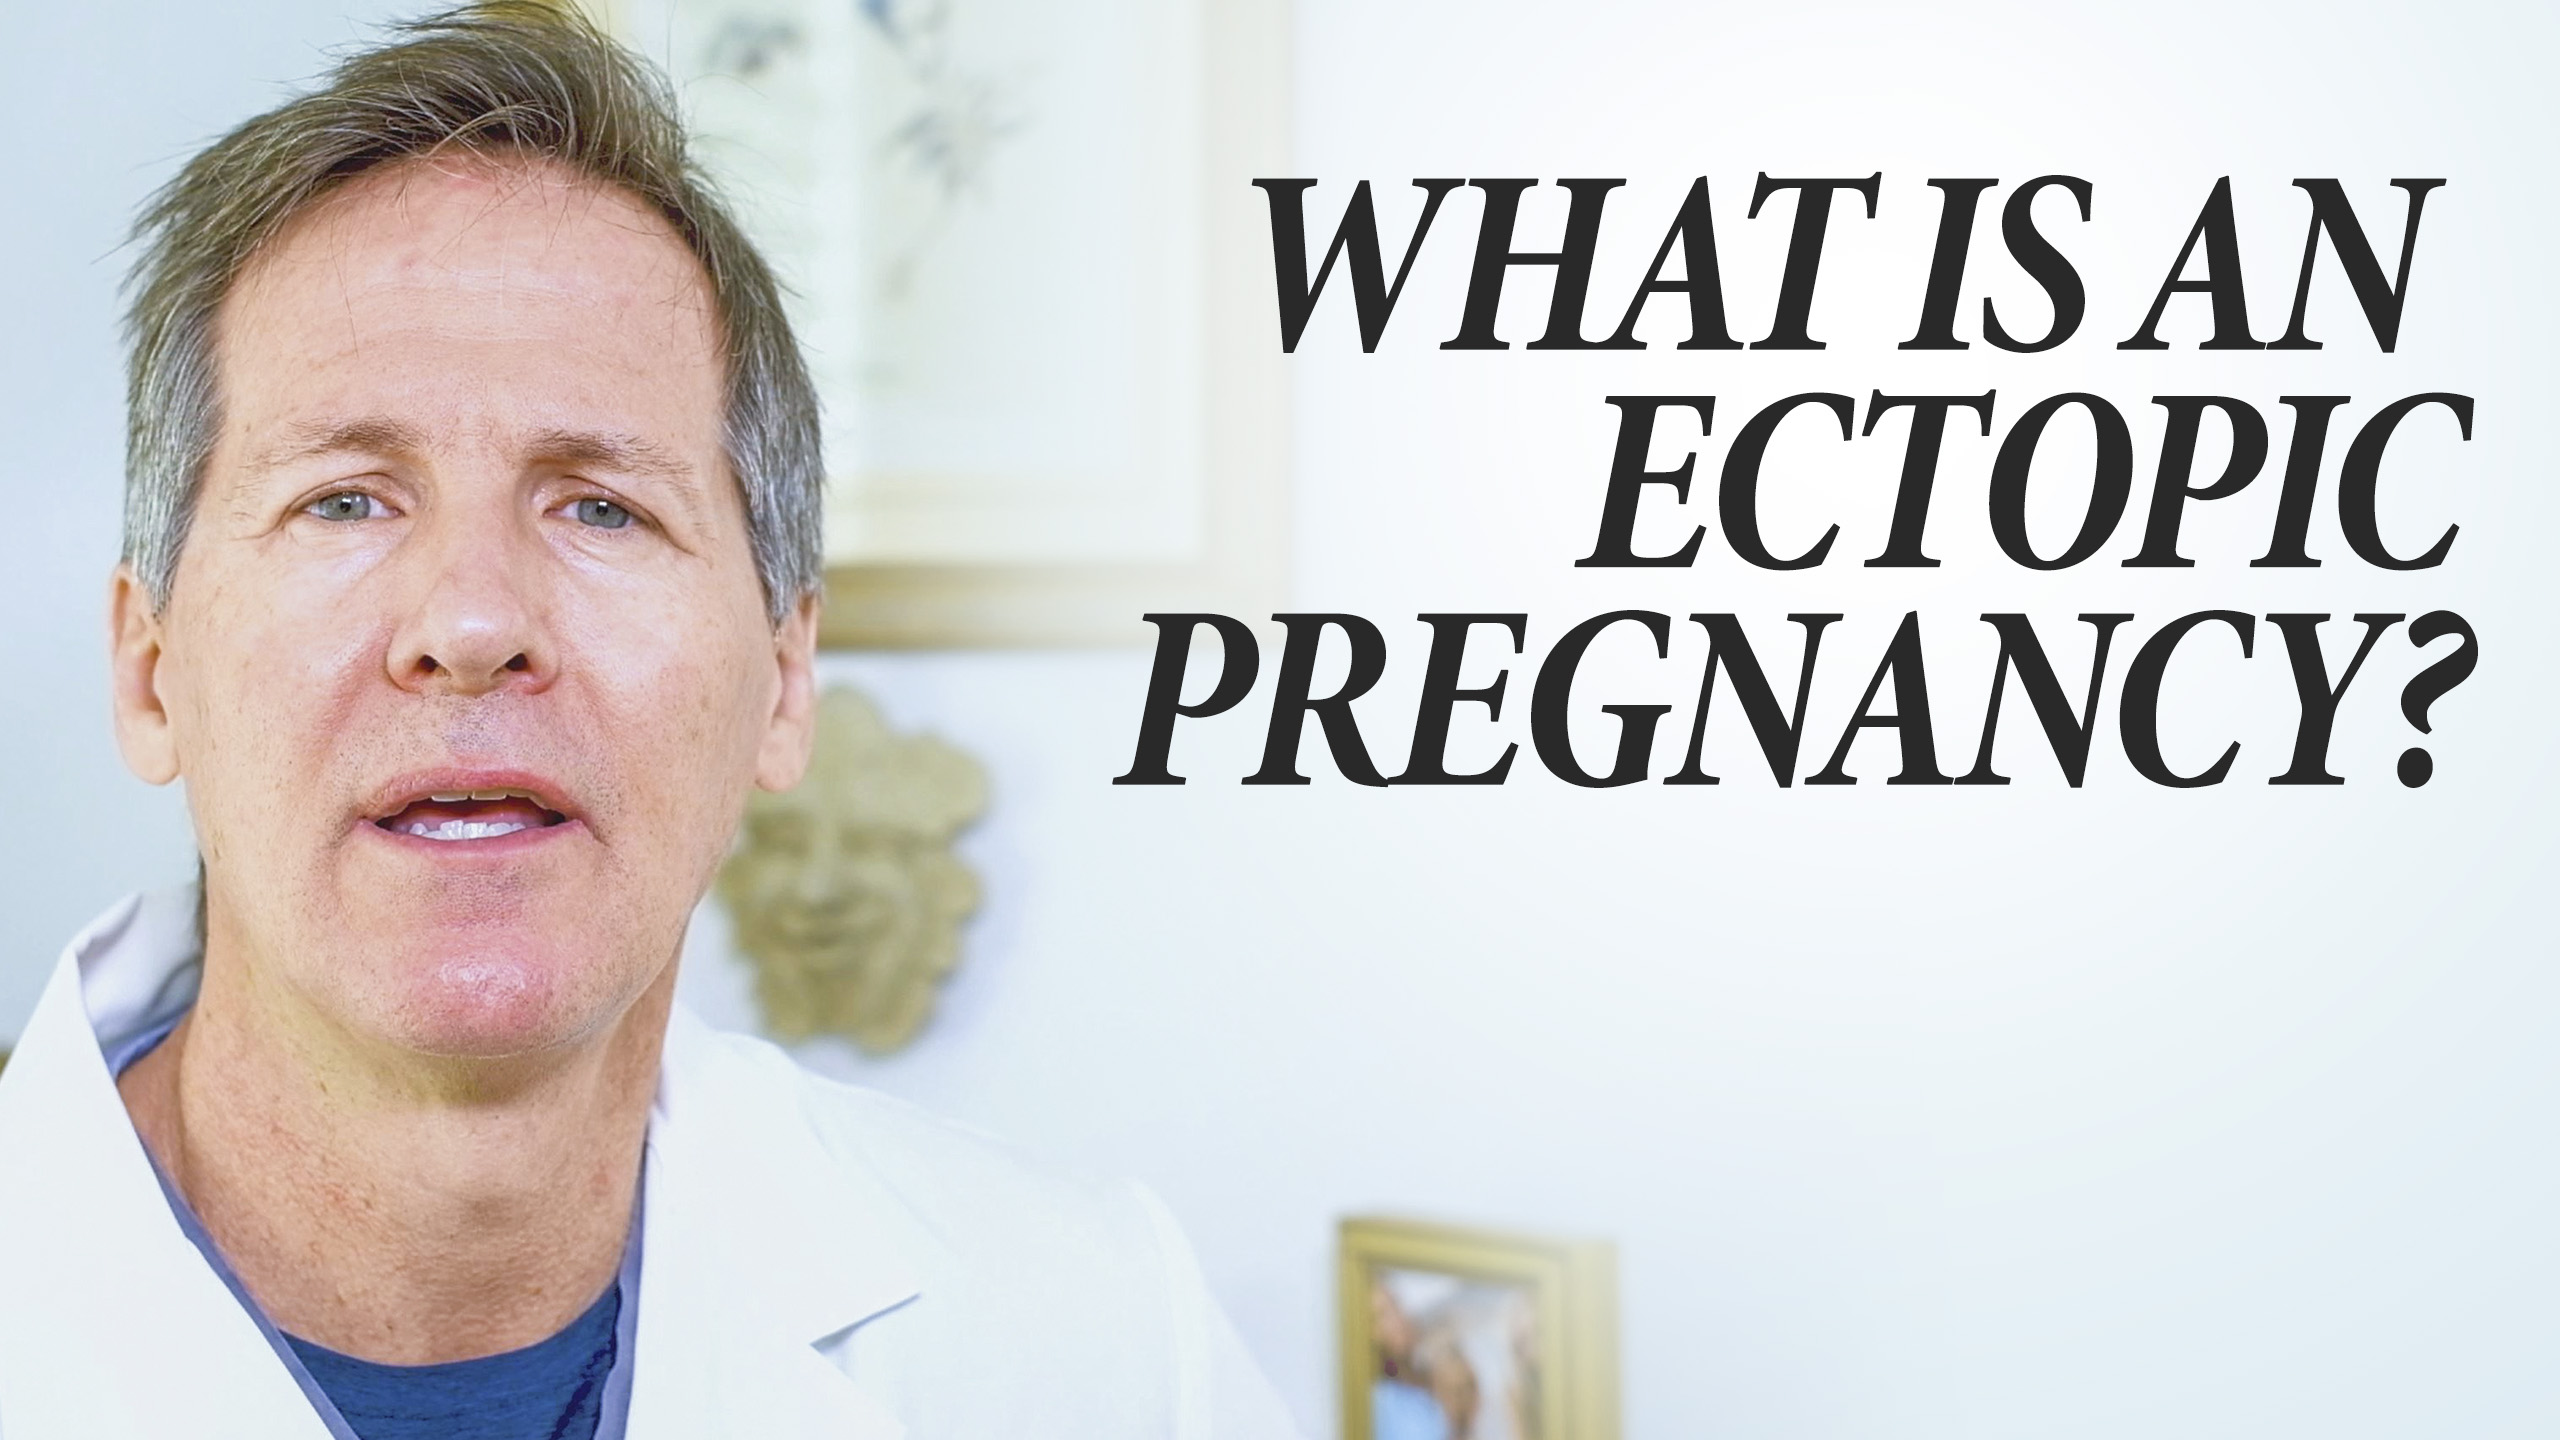 What is Ectopic Pregnancy?